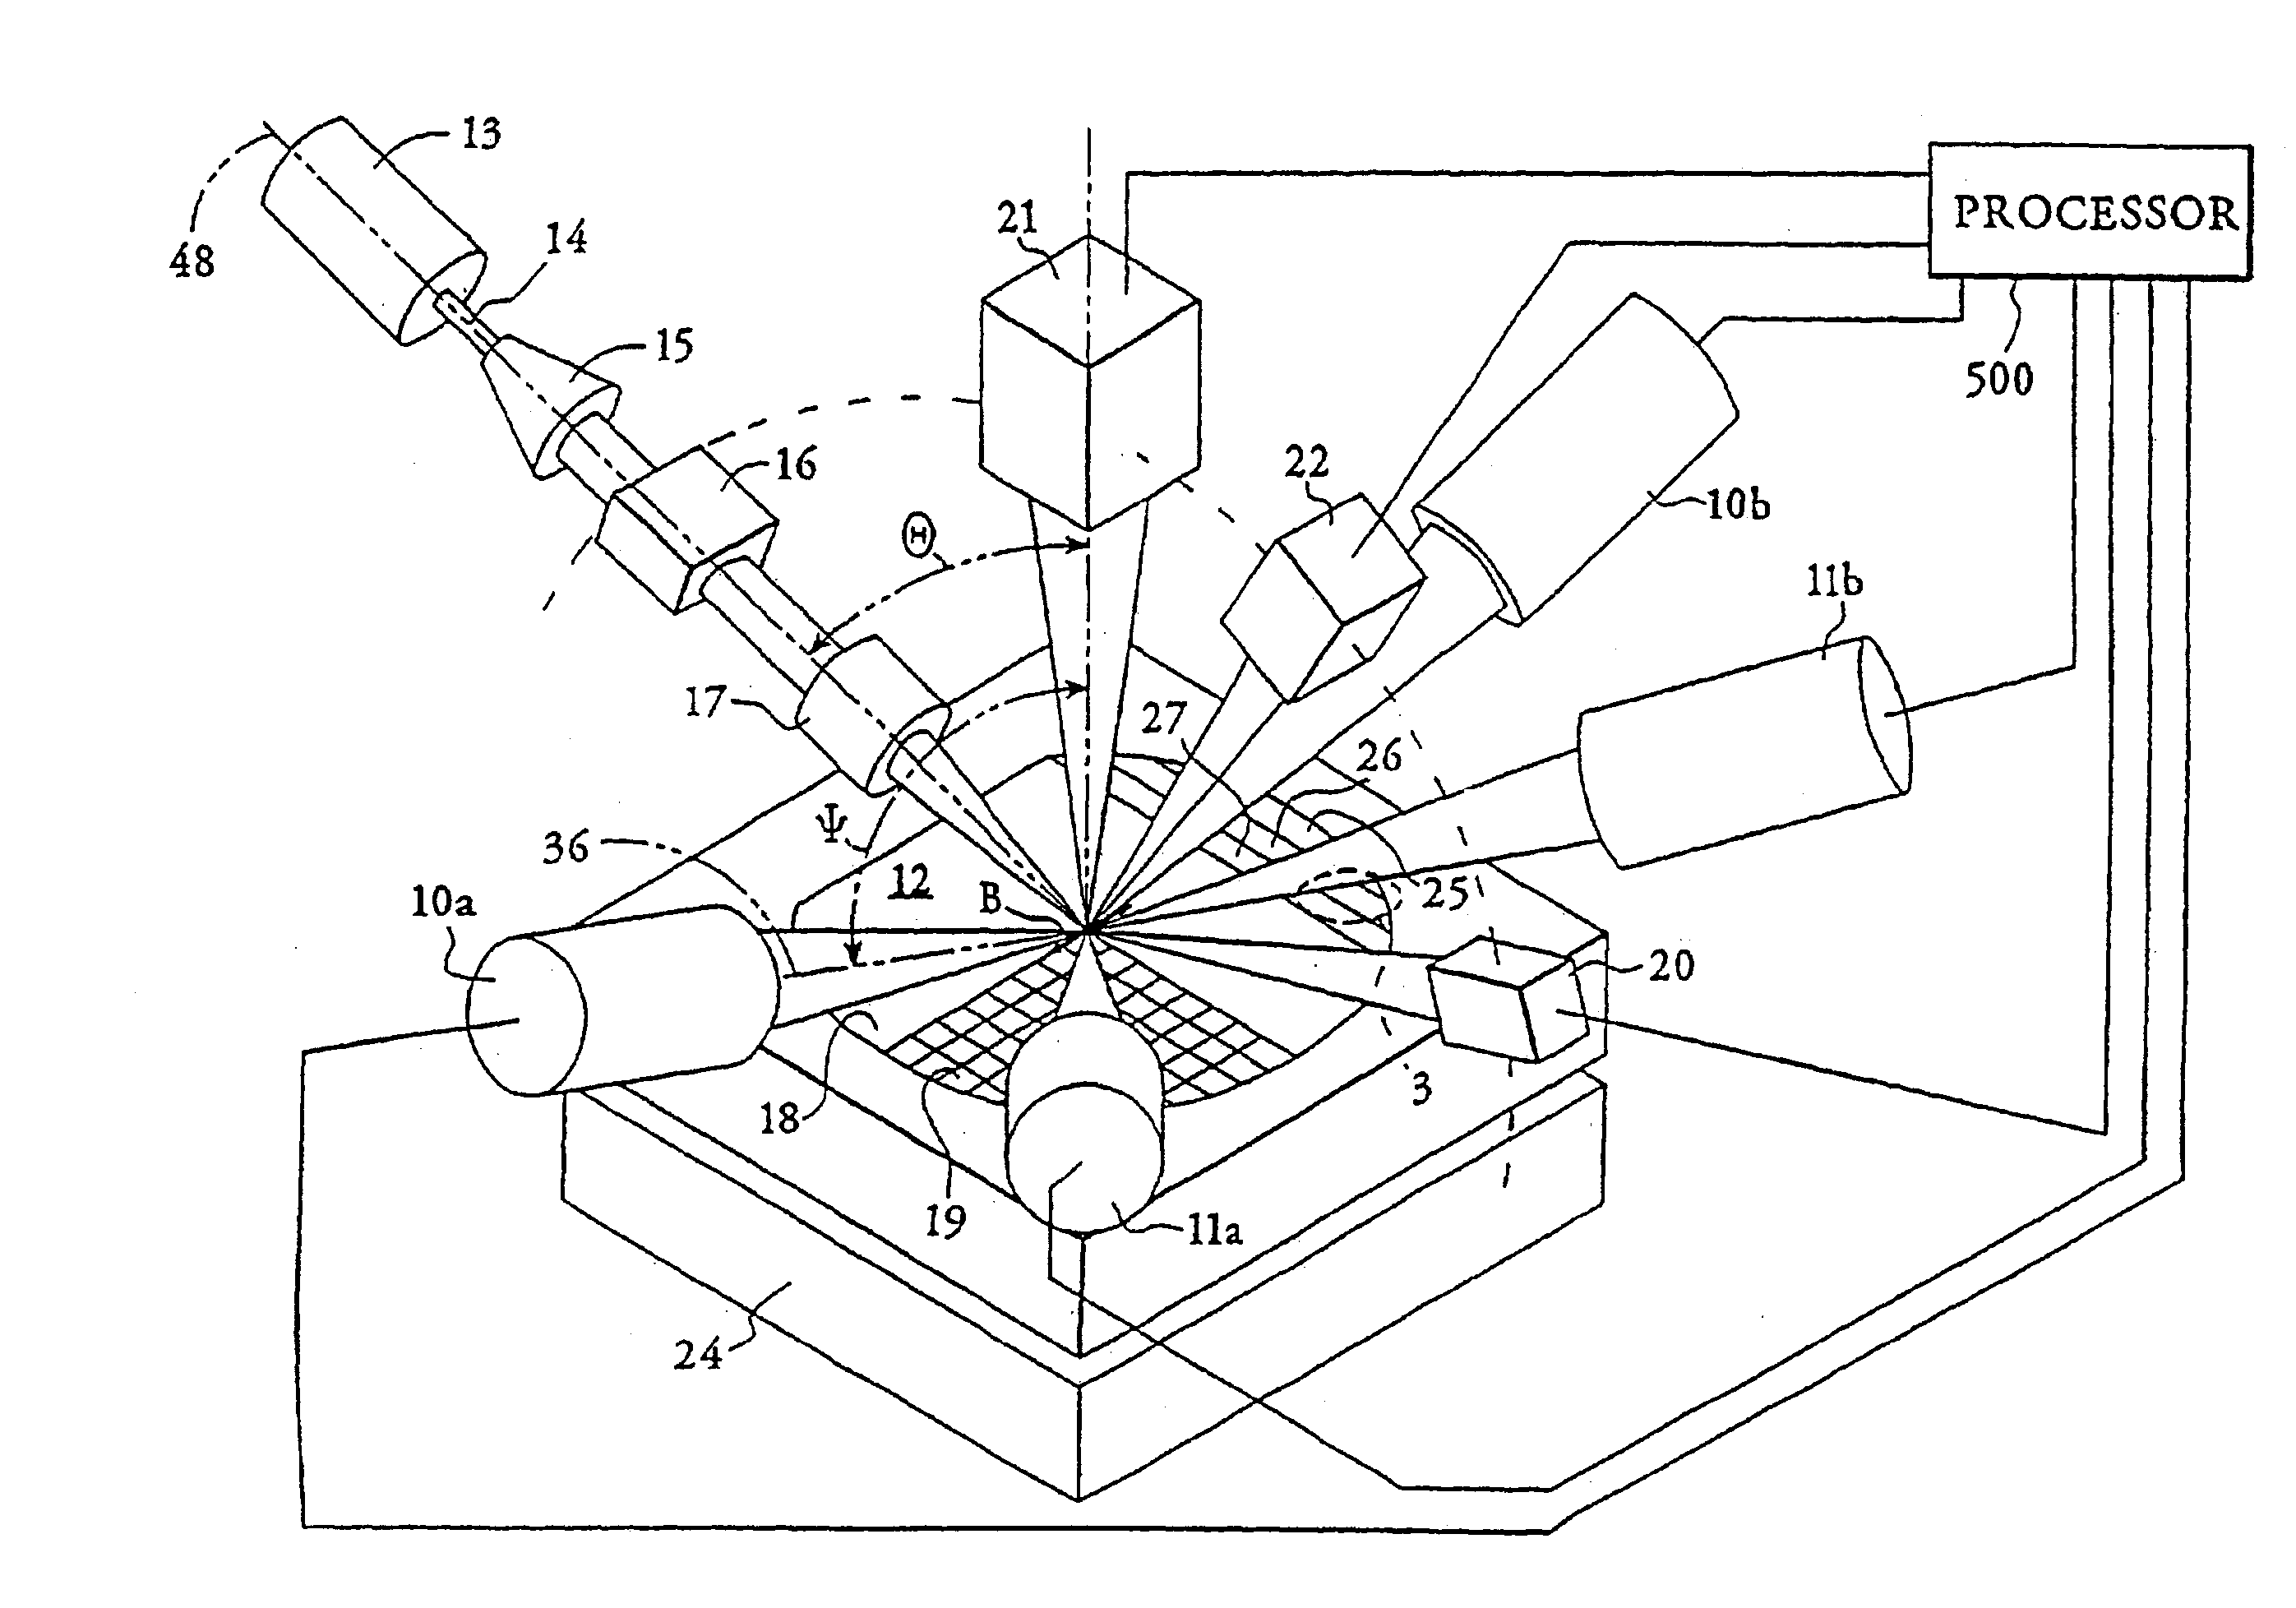 Optical scanning system for surface inspection